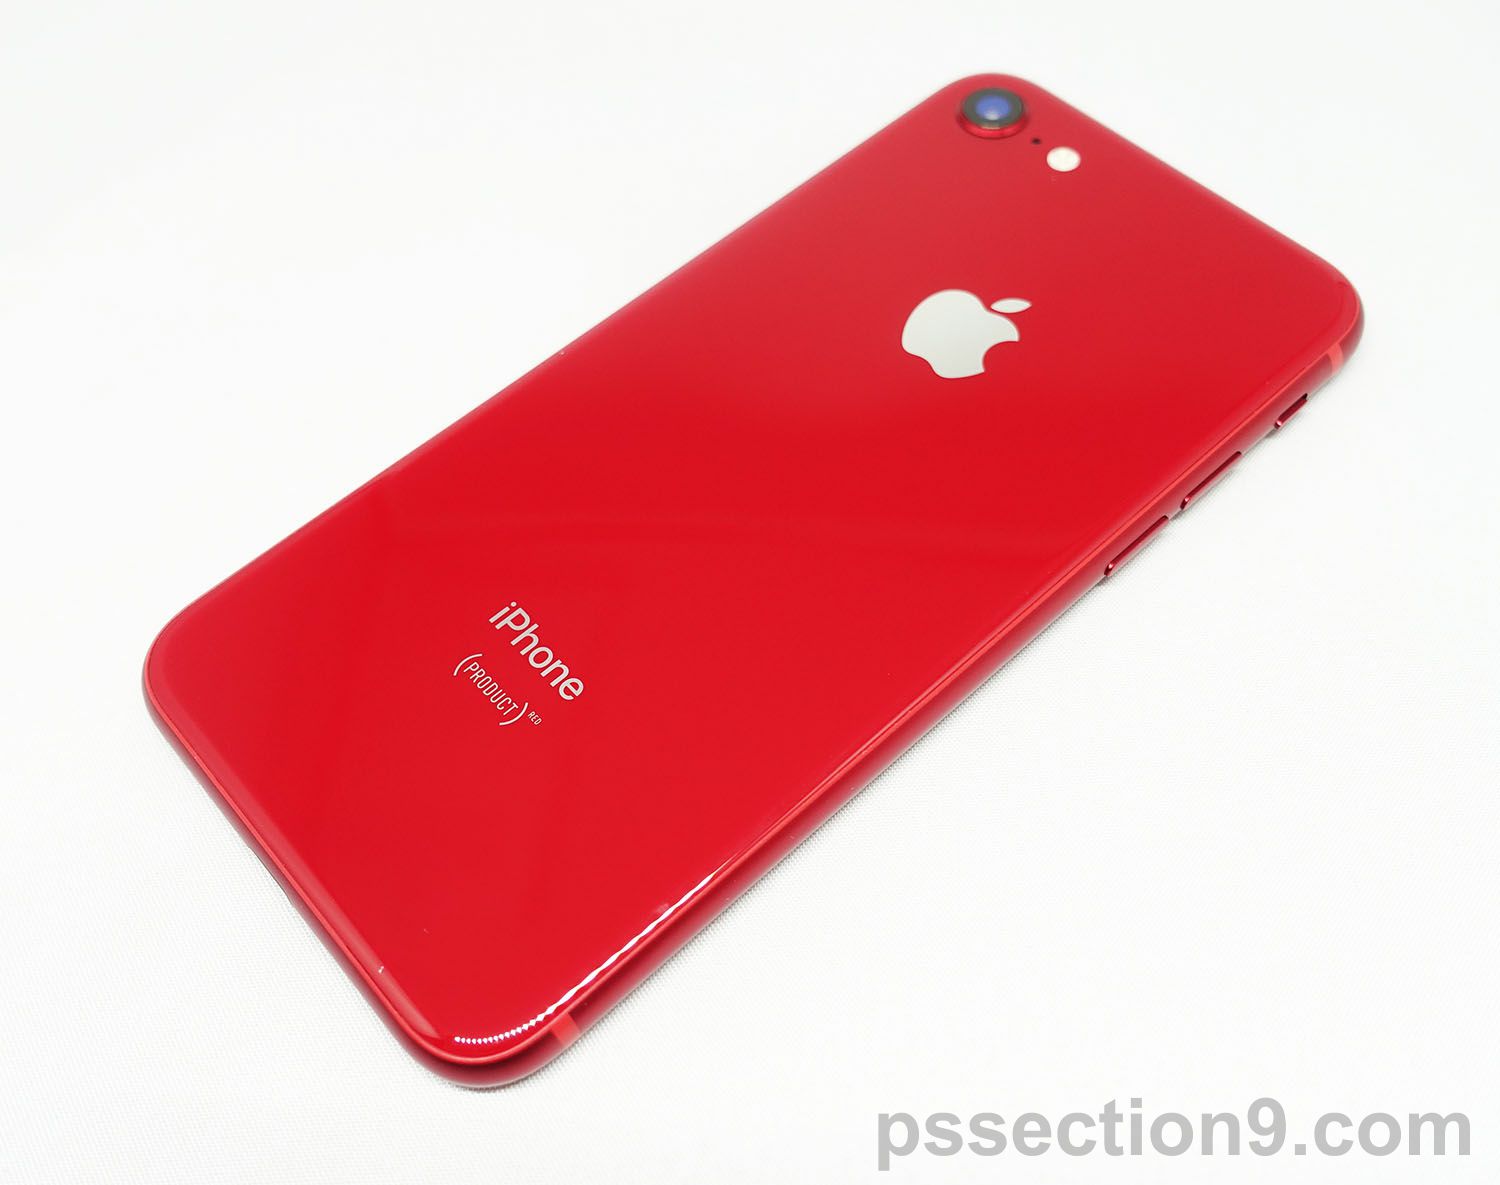 iPhone 8 (PRODUCT)REDを買いました。iPhone 7のREDとも比較してます！